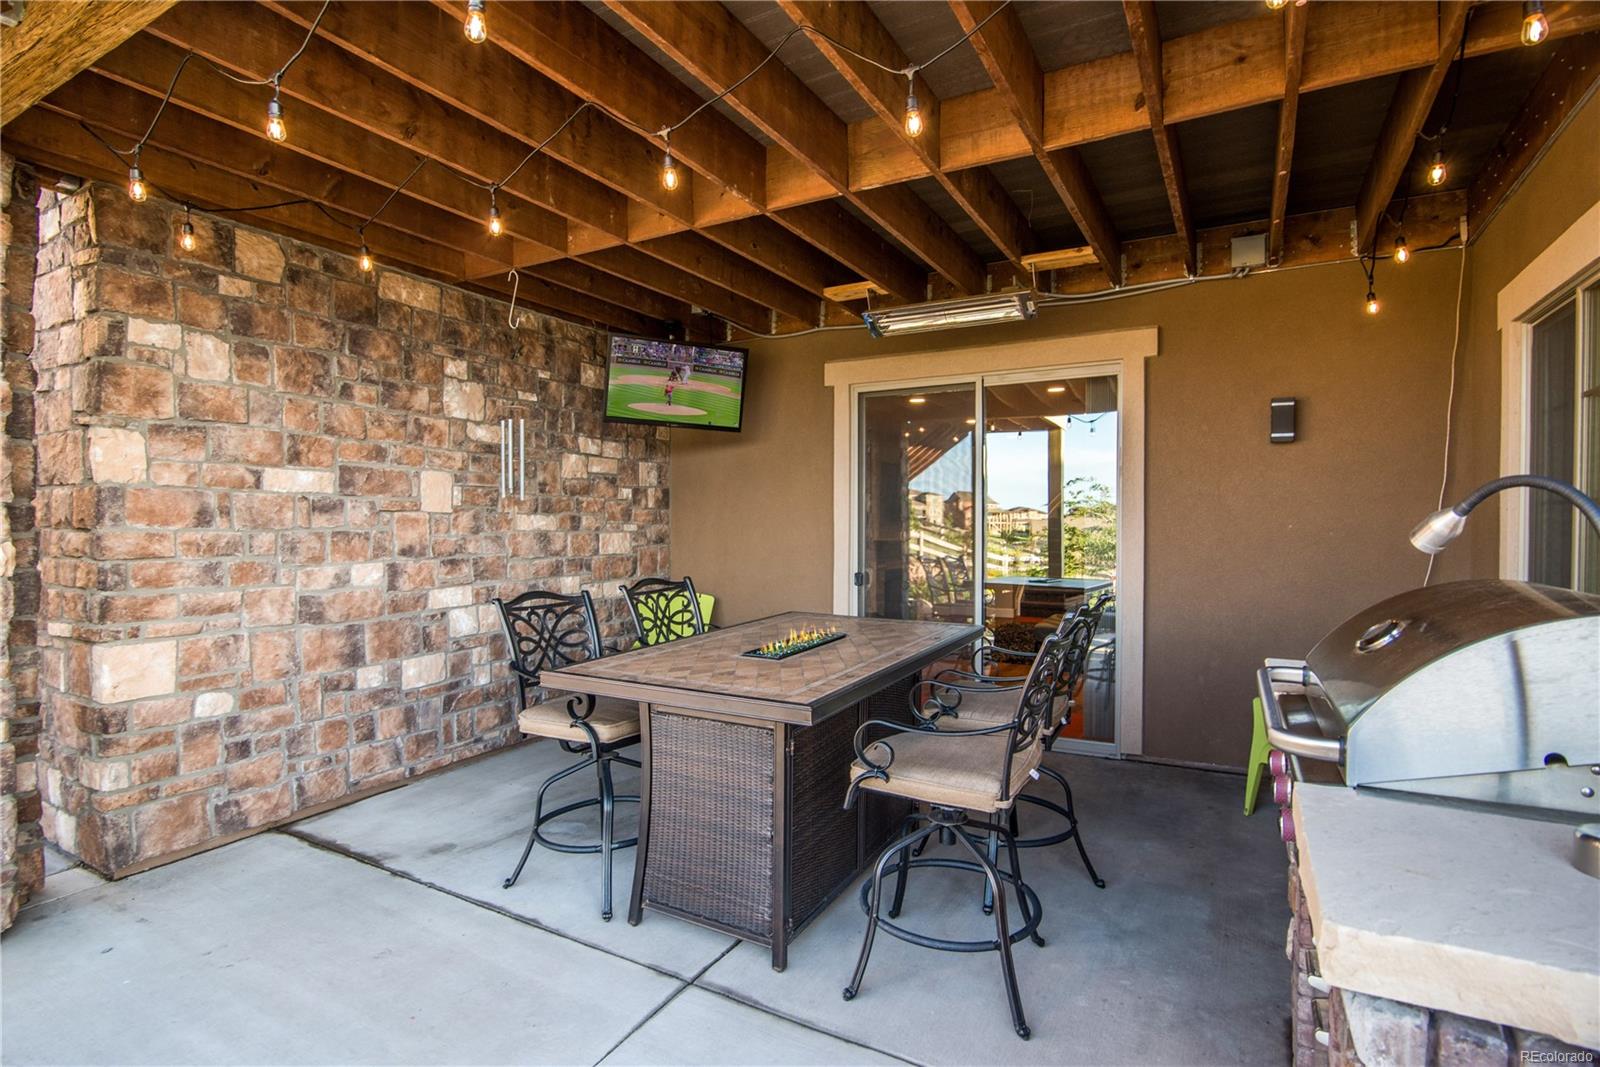 Enjoy entertaining in this outdoor area.